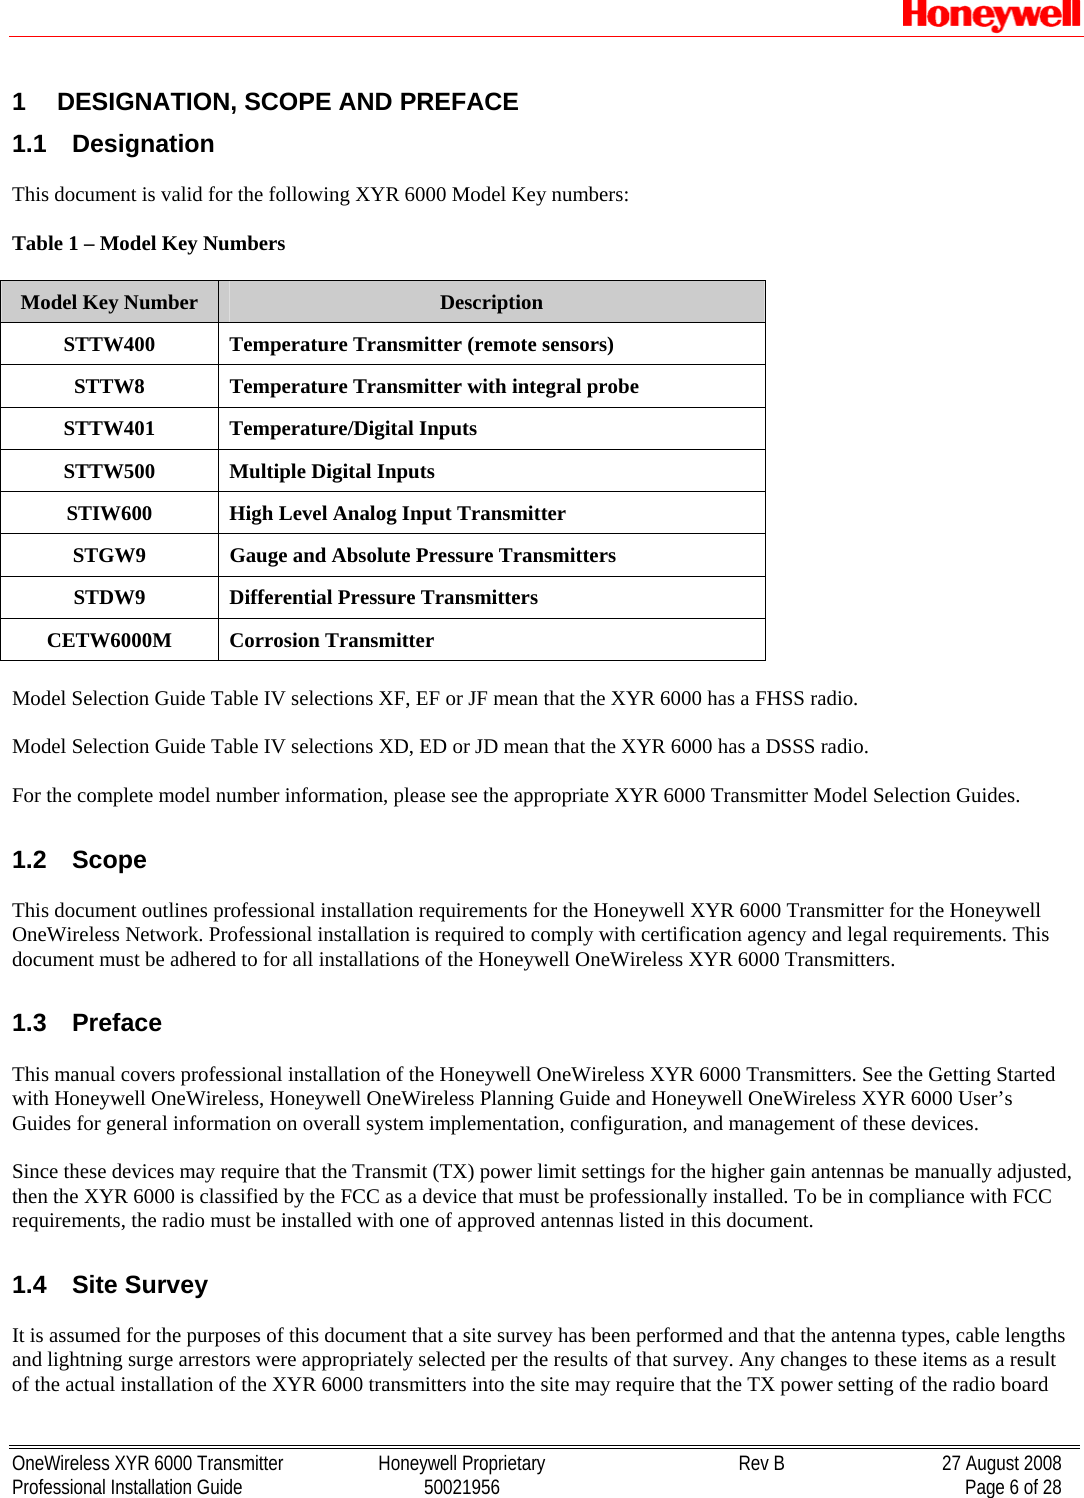   OneWireless XYR 6000 Transmitter  Honeywell Proprietary  Rev B  27 August 2008 Professional Installation Guide  50021956    Page 6 of 28 1  DESIGNATION, SCOPE AND PREFACE 1.1  Designation  This document is valid for the following XYR 6000 Model Key numbers:   Table 1 – Model Key Numbers  Model Key Number  Description STTW400  Temperature Transmitter (remote sensors) STTW8  Temperature Transmitter with integral probe STTW401 Temperature/Digital Inputs STTW500  Multiple Digital Inputs STIW600  High Level Analog Input Transmitter STGW9  Gauge and Absolute Pressure Transmitters STDW9  Differential Pressure Transmitters CETW6000M Corrosion Transmitter  Model Selection Guide Table IV selections XF, EF or JF mean that the XYR 6000 has a FHSS radio.  Model Selection Guide Table IV selections XD, ED or JD mean that the XYR 6000 has a DSSS radio.  For the complete model number information, please see the appropriate XYR 6000 Transmitter Model Selection Guides.  1.2  Scope  This document outlines professional installation requirements for the Honeywell XYR 6000 Transmitter for the Honeywell OneWireless Network. Professional installation is required to comply with certification agency and legal requirements. This document must be adhered to for all installations of the Honeywell OneWireless XYR 6000 Transmitters.   1.3  Preface  This manual covers professional installation of the Honeywell OneWireless XYR 6000 Transmitters. See the Getting Started with Honeywell OneWireless, Honeywell OneWireless Planning Guide and Honeywell OneWireless XYR 6000 User’s Guides for general information on overall system implementation, configuration, and management of these devices.  Since these devices may require that the Transmit (TX) power limit settings for the higher gain antennas be manually adjusted, then the XYR 6000 is classified by the FCC as a device that must be professionally installed. To be in compliance with FCC requirements, the radio must be installed with one of approved antennas listed in this document.  1.4  Site Survey  It is assumed for the purposes of this document that a site survey has been performed and that the antenna types, cable lengths and lightning surge arrestors were appropriately selected per the results of that survey. Any changes to these items as a result of the actual installation of the XYR 6000 transmitters into the site may require that the TX power setting of the radio board 